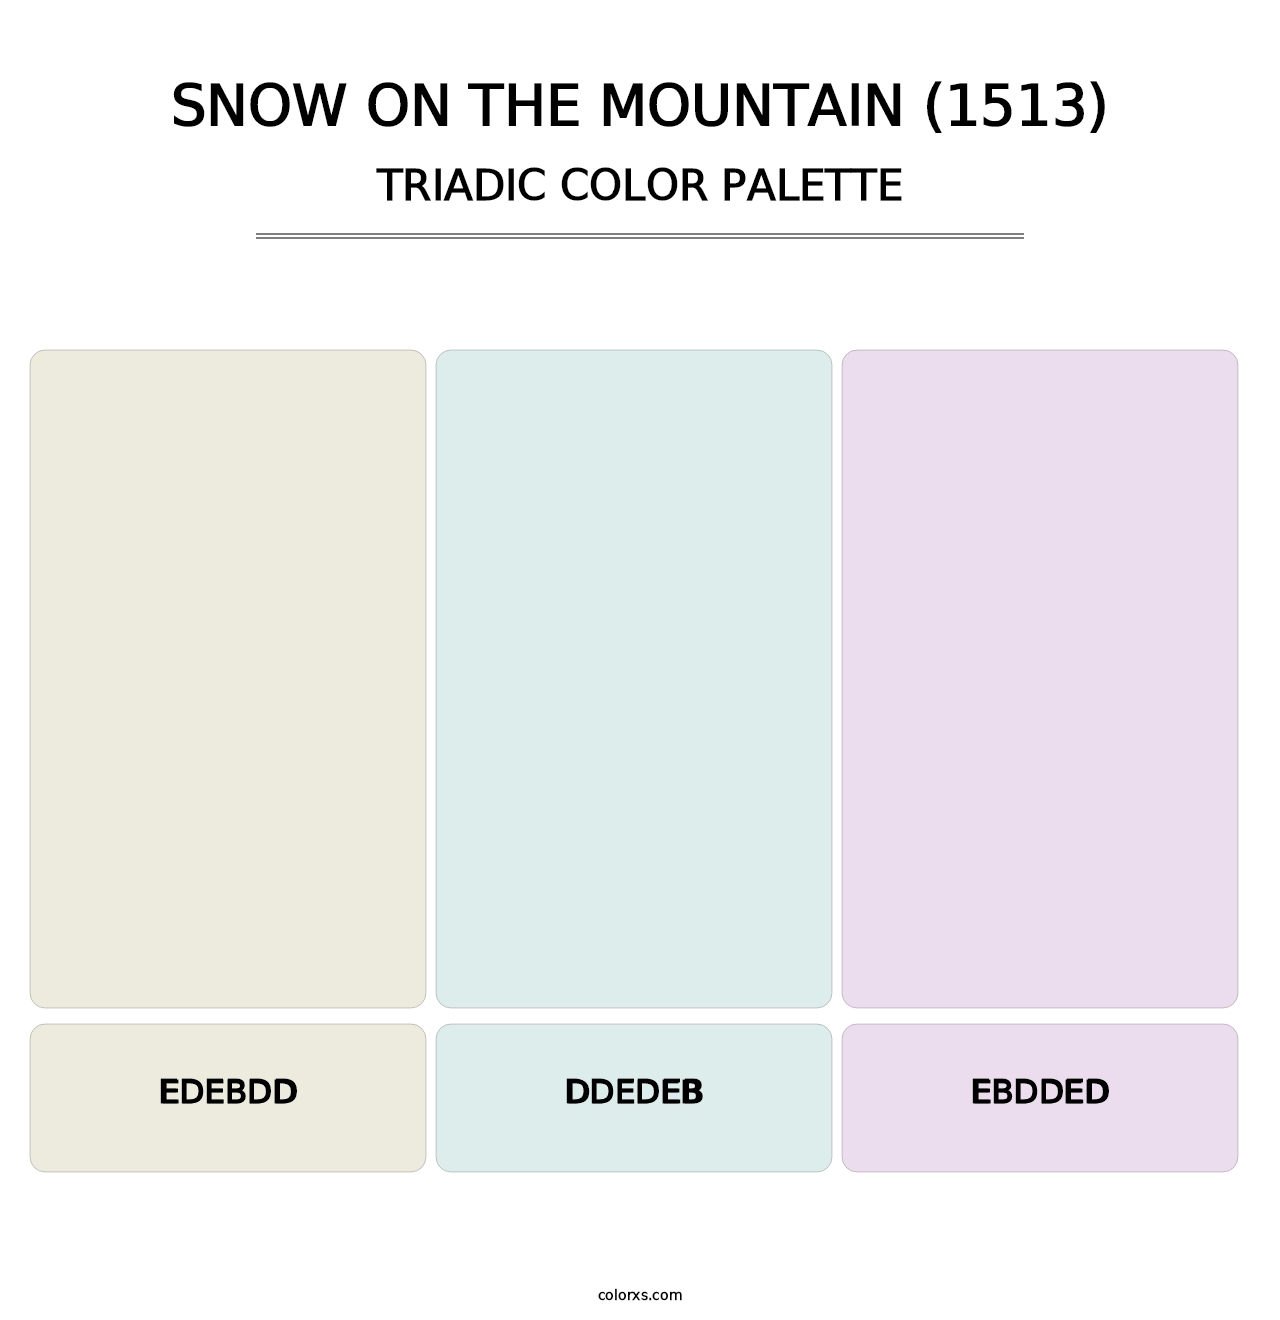 Snow on the Mountain (1513) - Triadic Color Palette